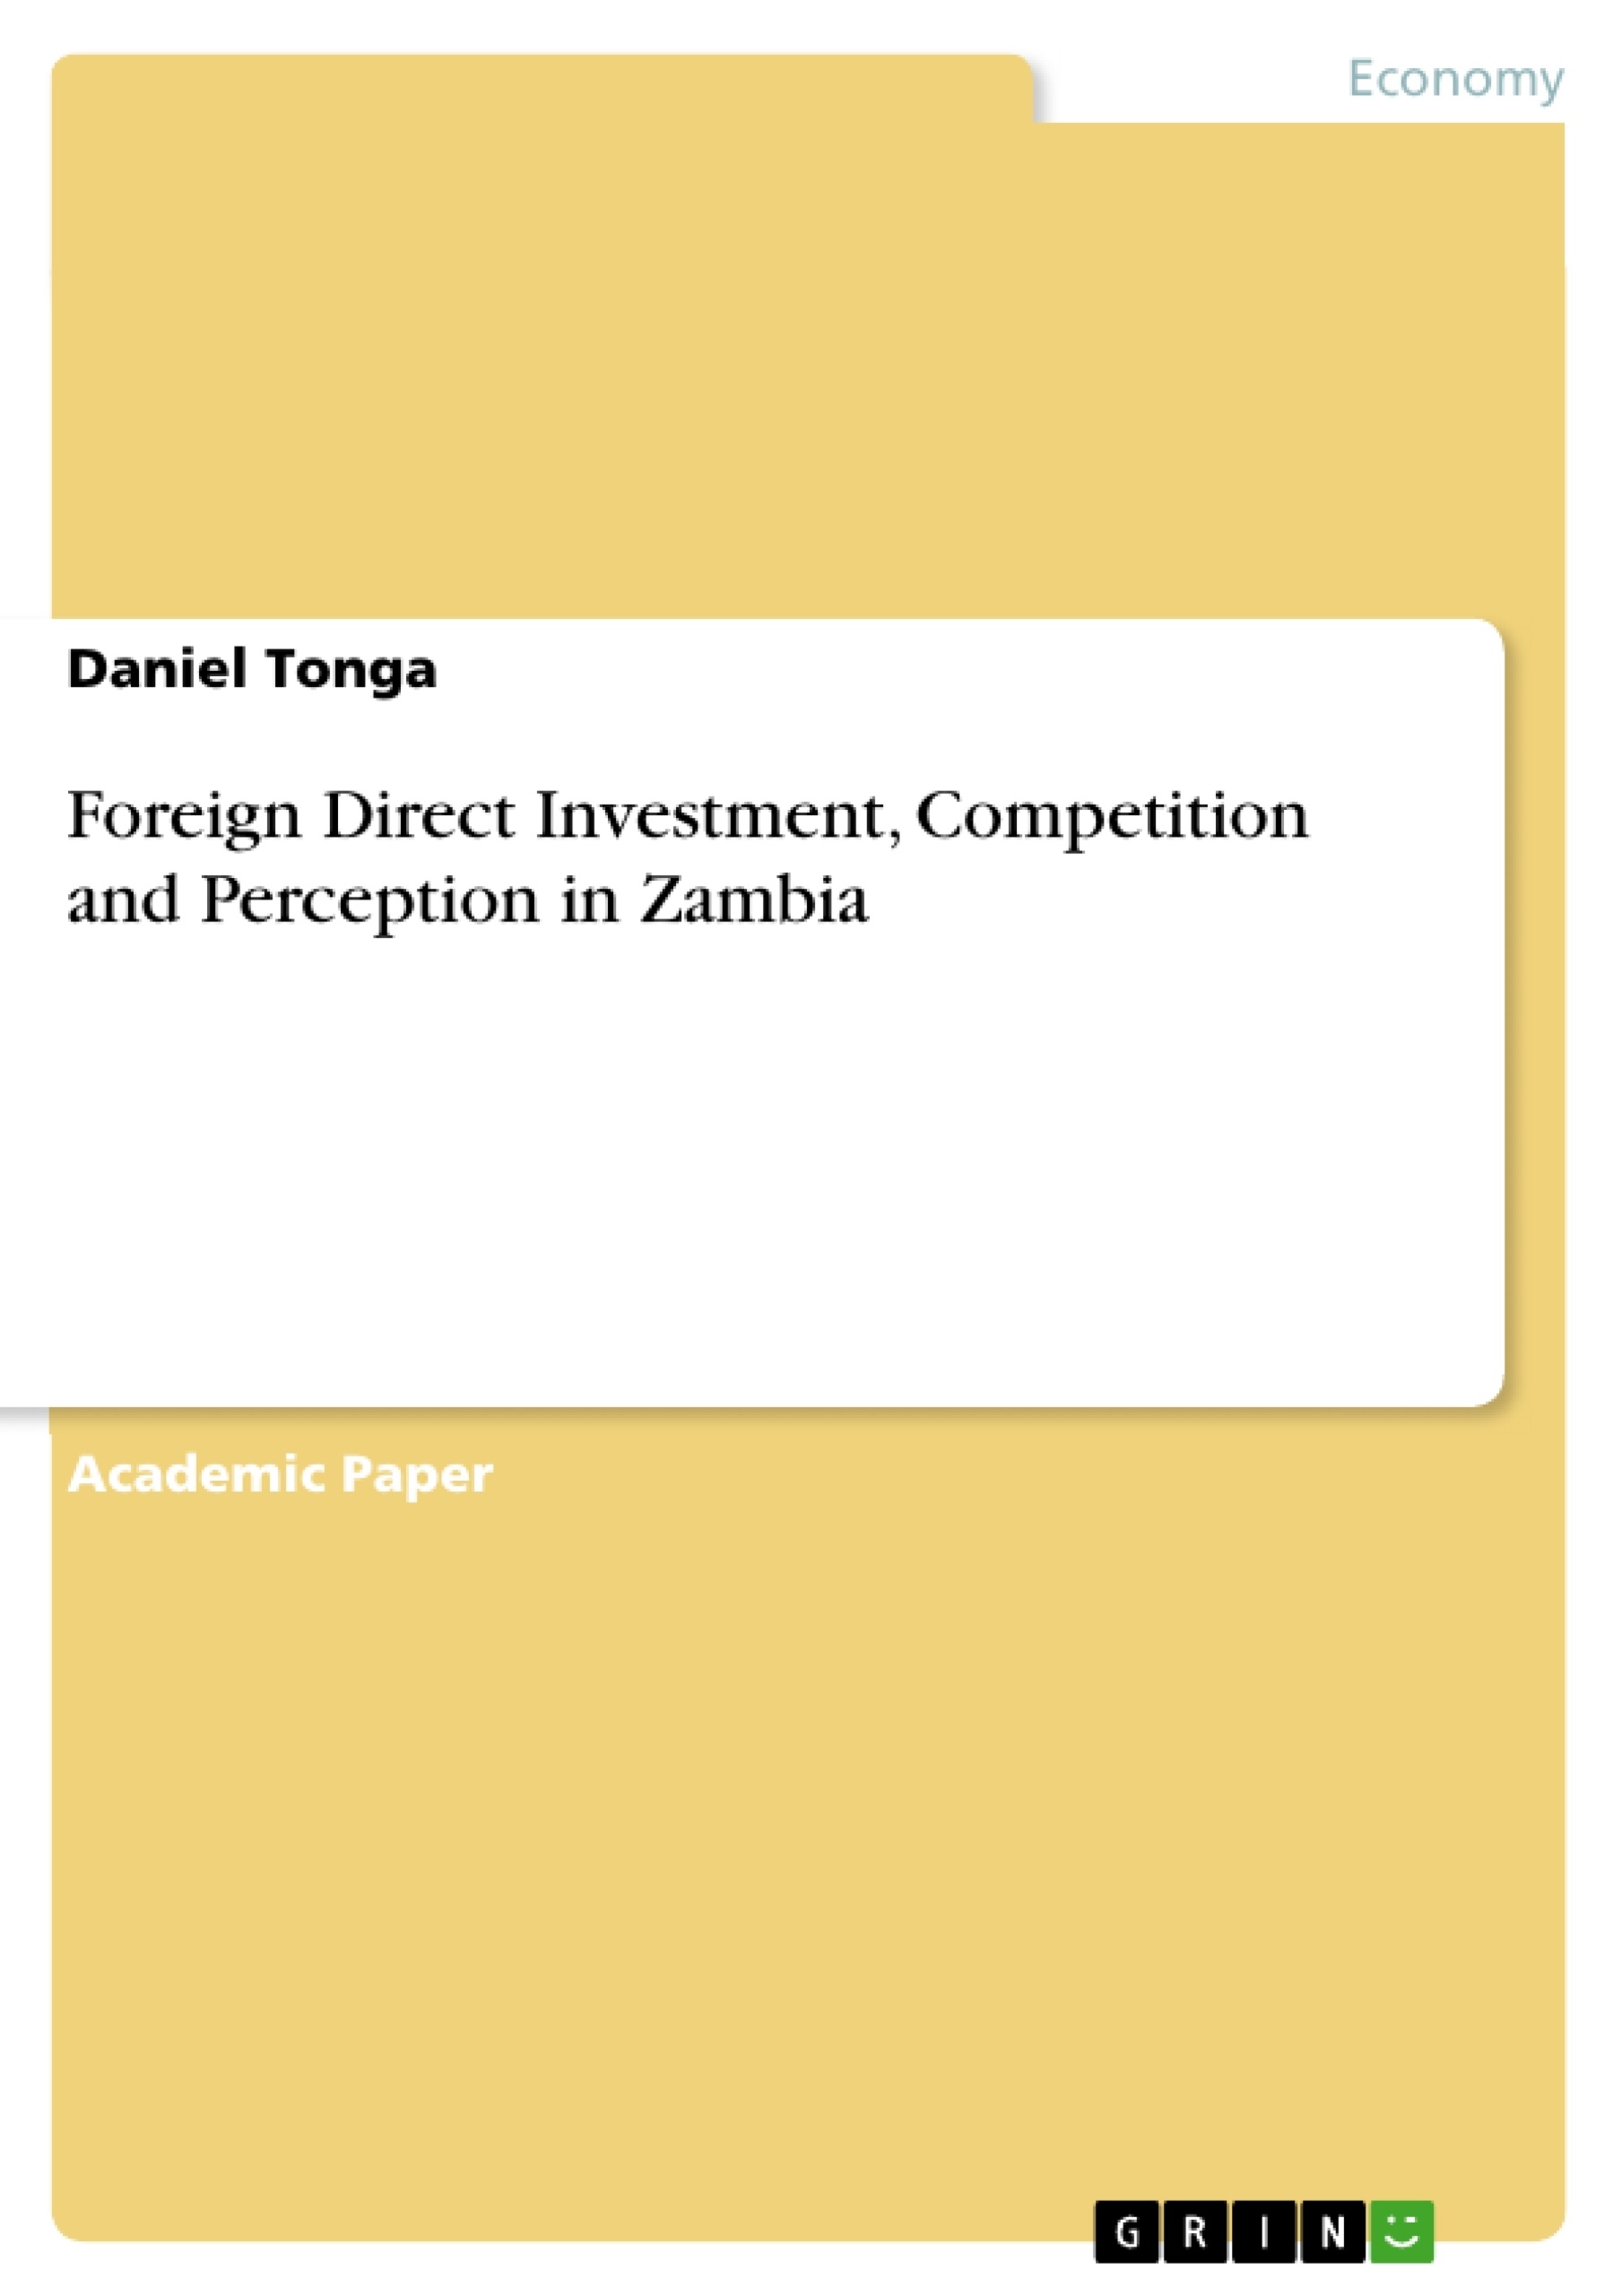 Title: Foreign Direct Investment, Competition and Perception in Zambia